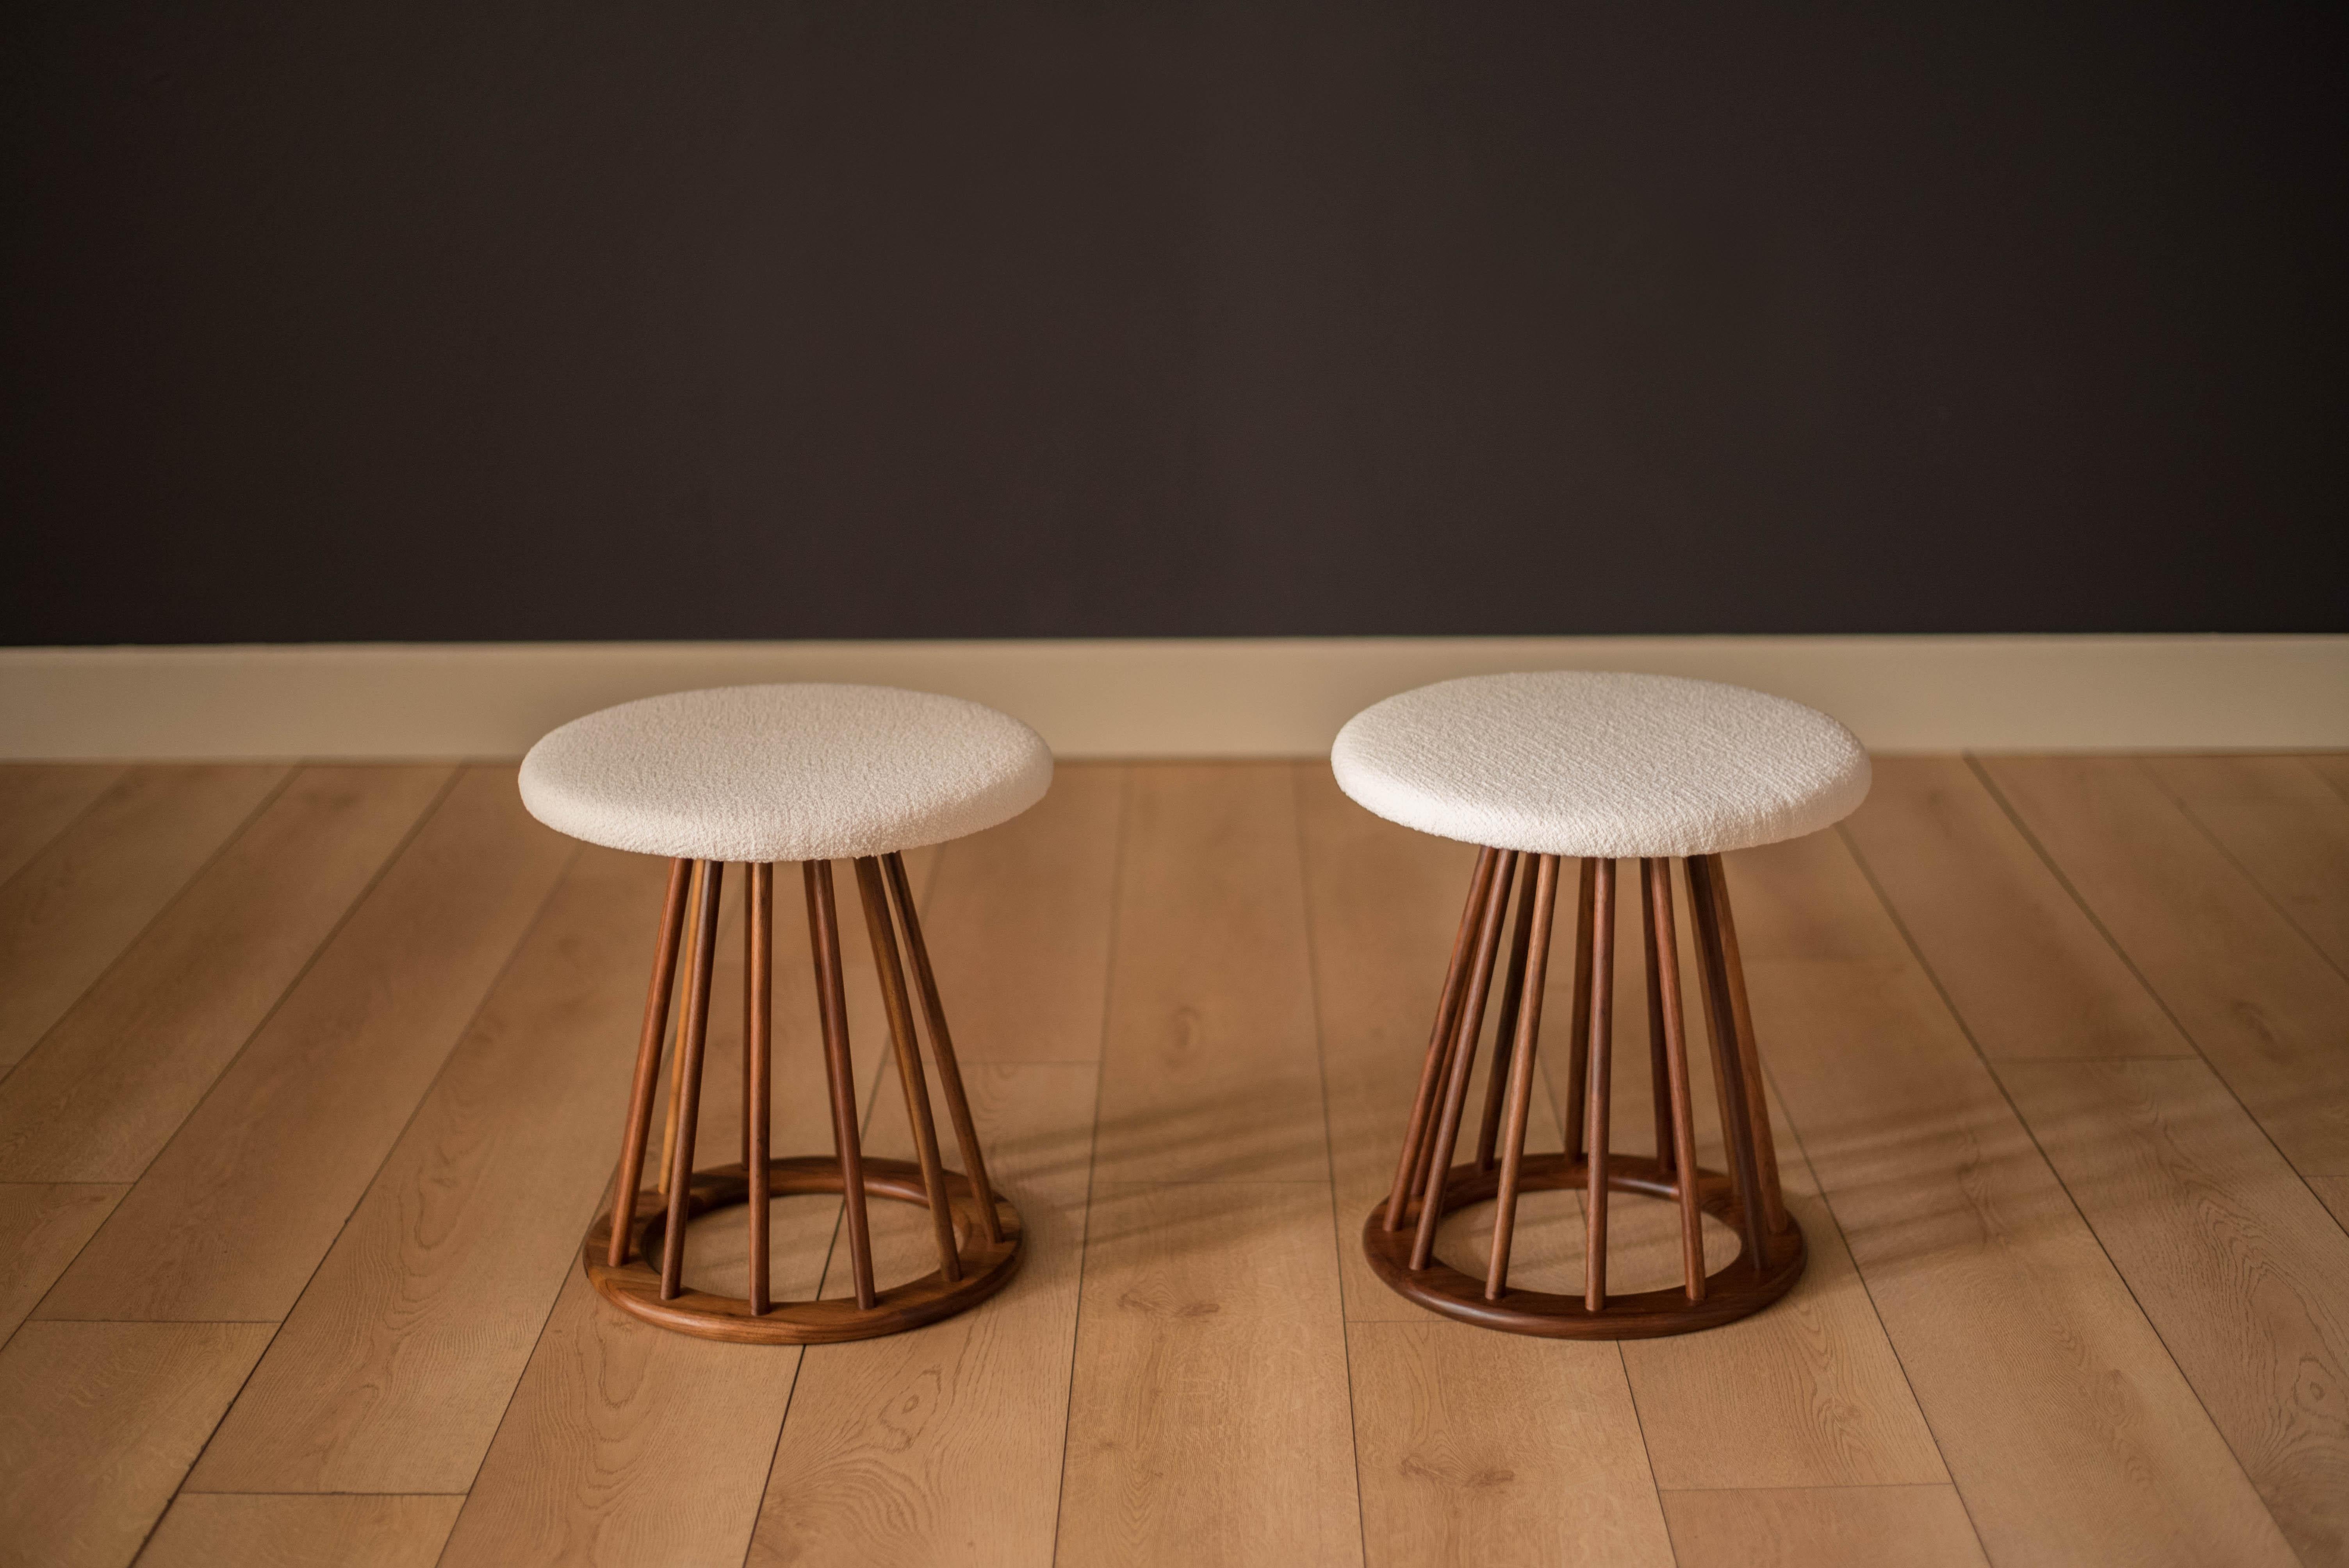 Vintage pair of round spindle stools designed by Arthur Umanoff for Washington Woodcraft. This set is constructed of solid walnut and has been newly reupholstered in a white boucle fabric. Perfect to use as ottomans, extra seating, or side tables